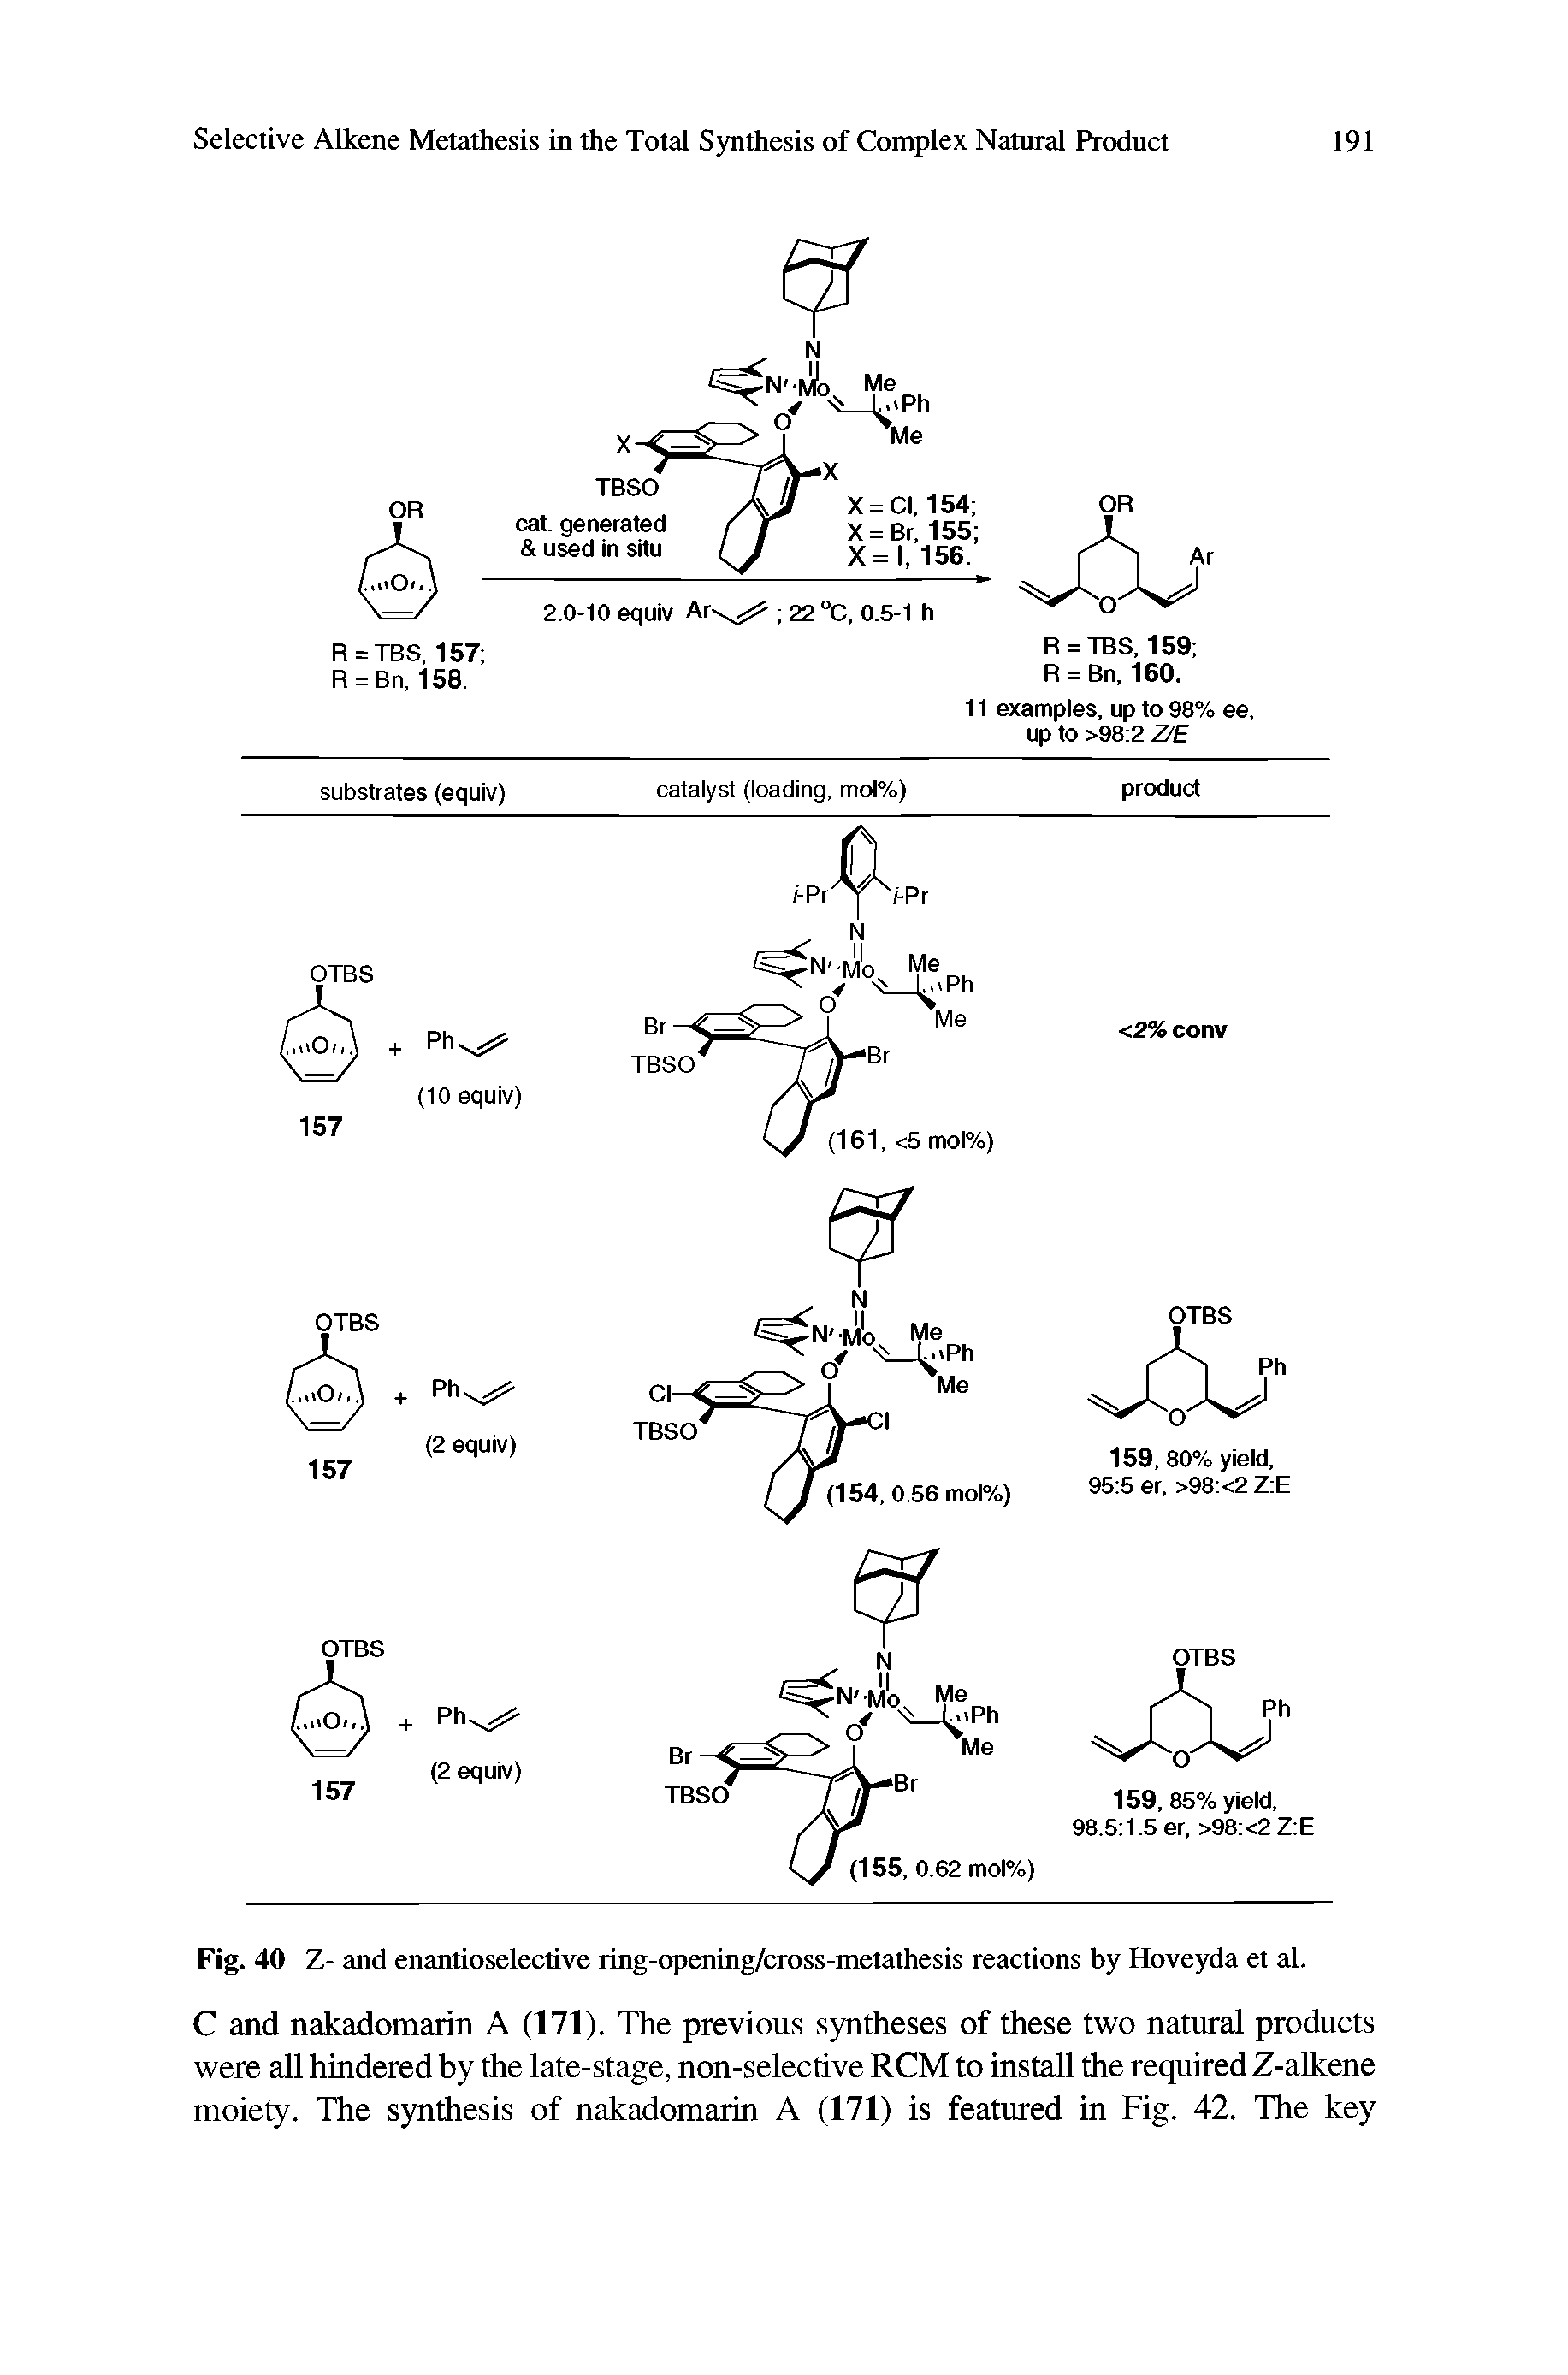 Fig. 40 Z- and enantioselective ring-opening/cross-metathesis reactions by Hoveyda et al.